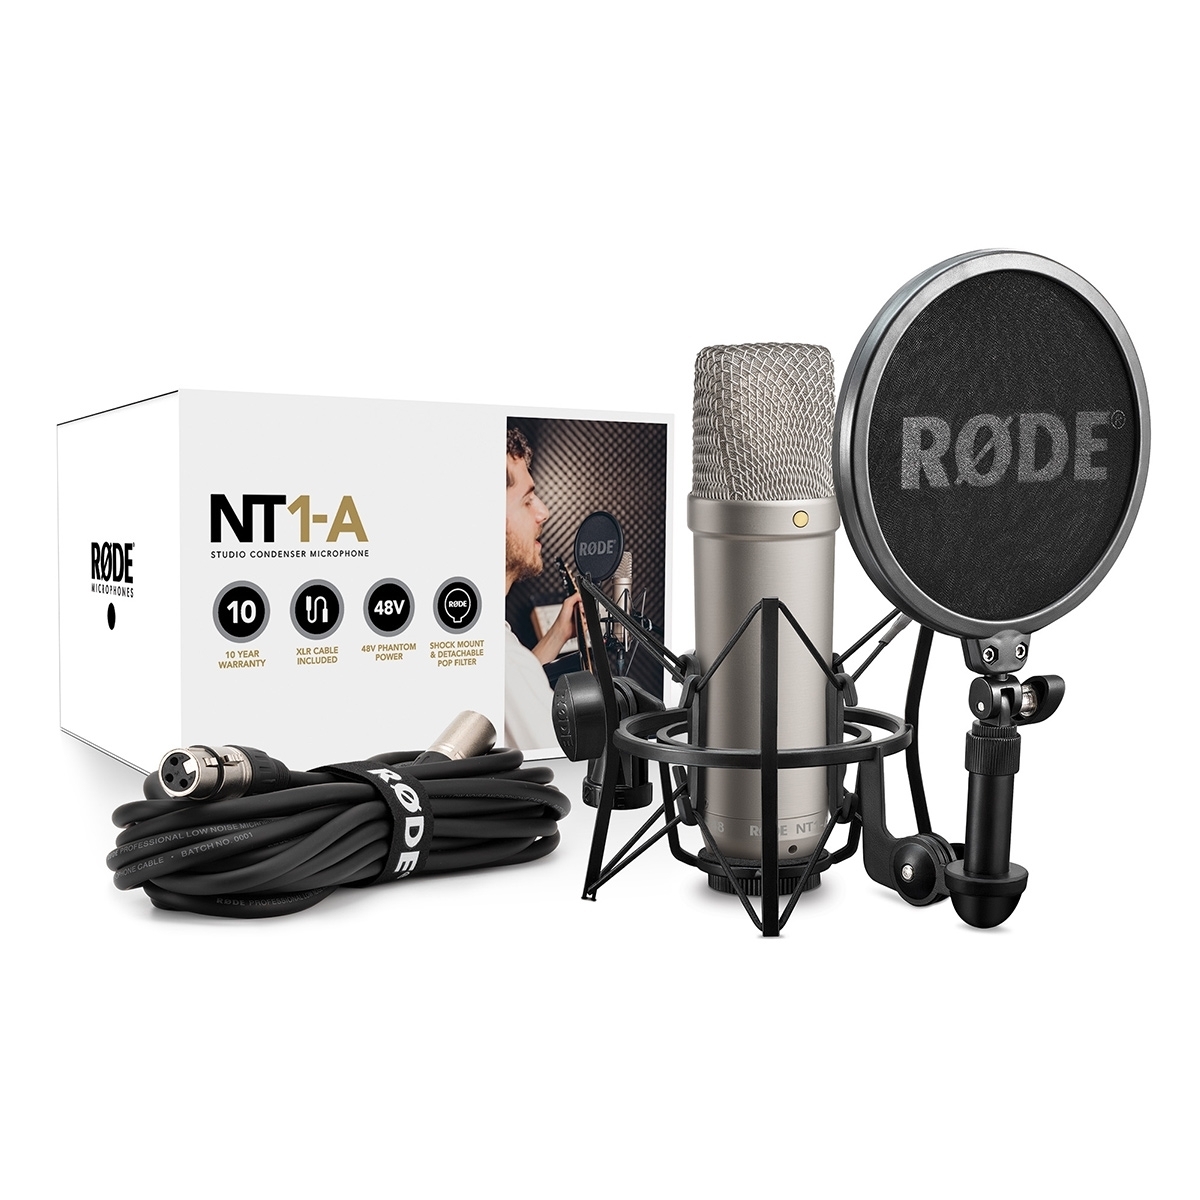 NT1-A Complete Vocal Recording Solution